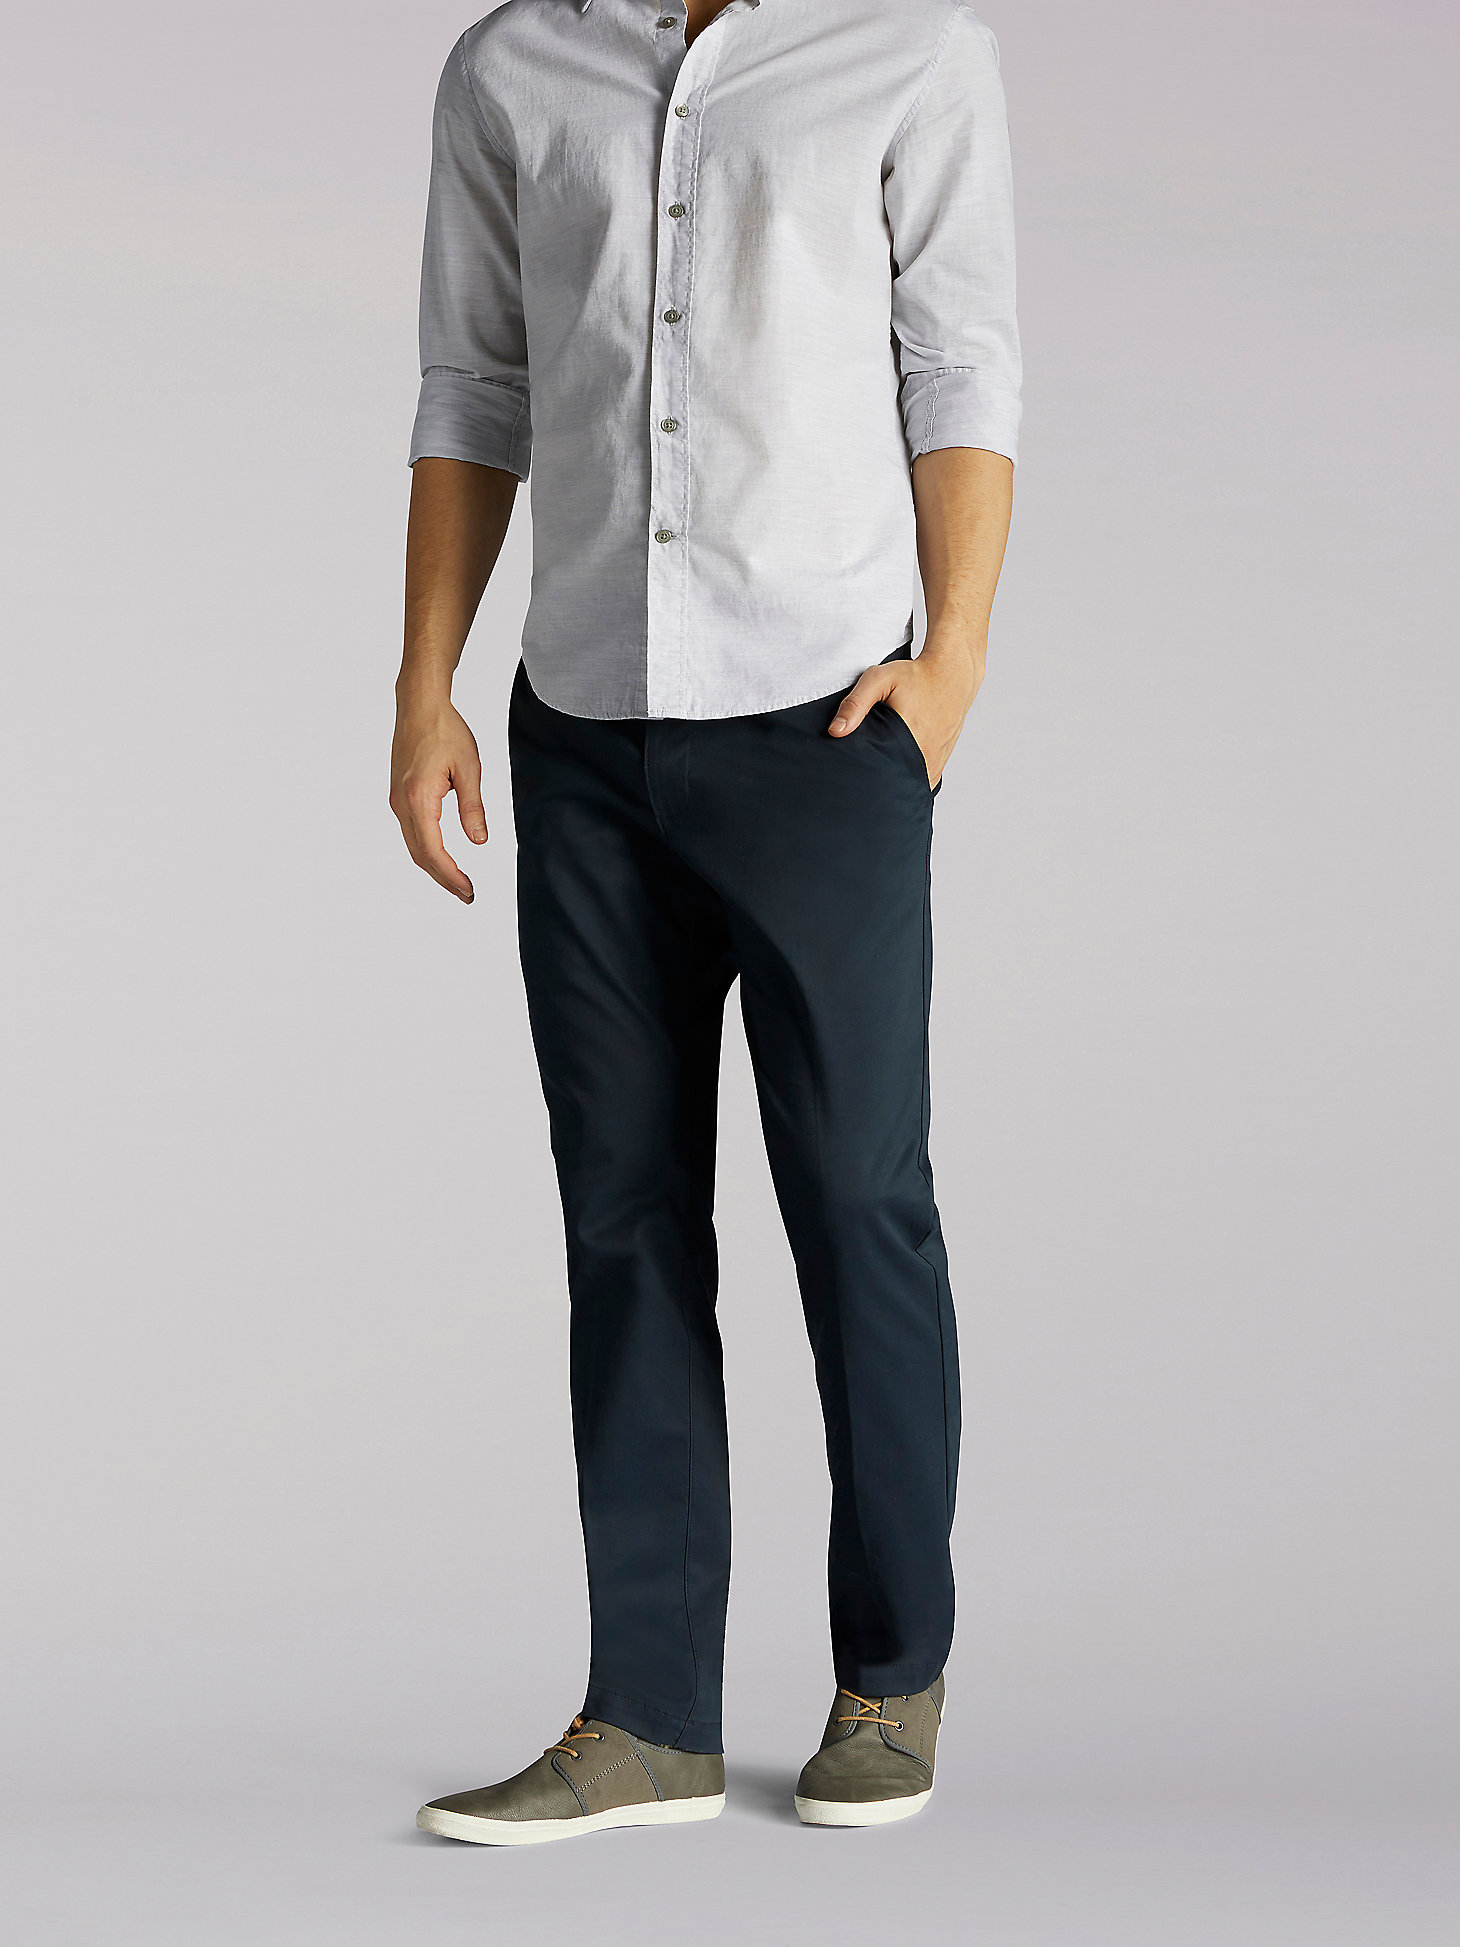 Men's Extreme Motion Slim Fit Khaki Pant in Navy main view